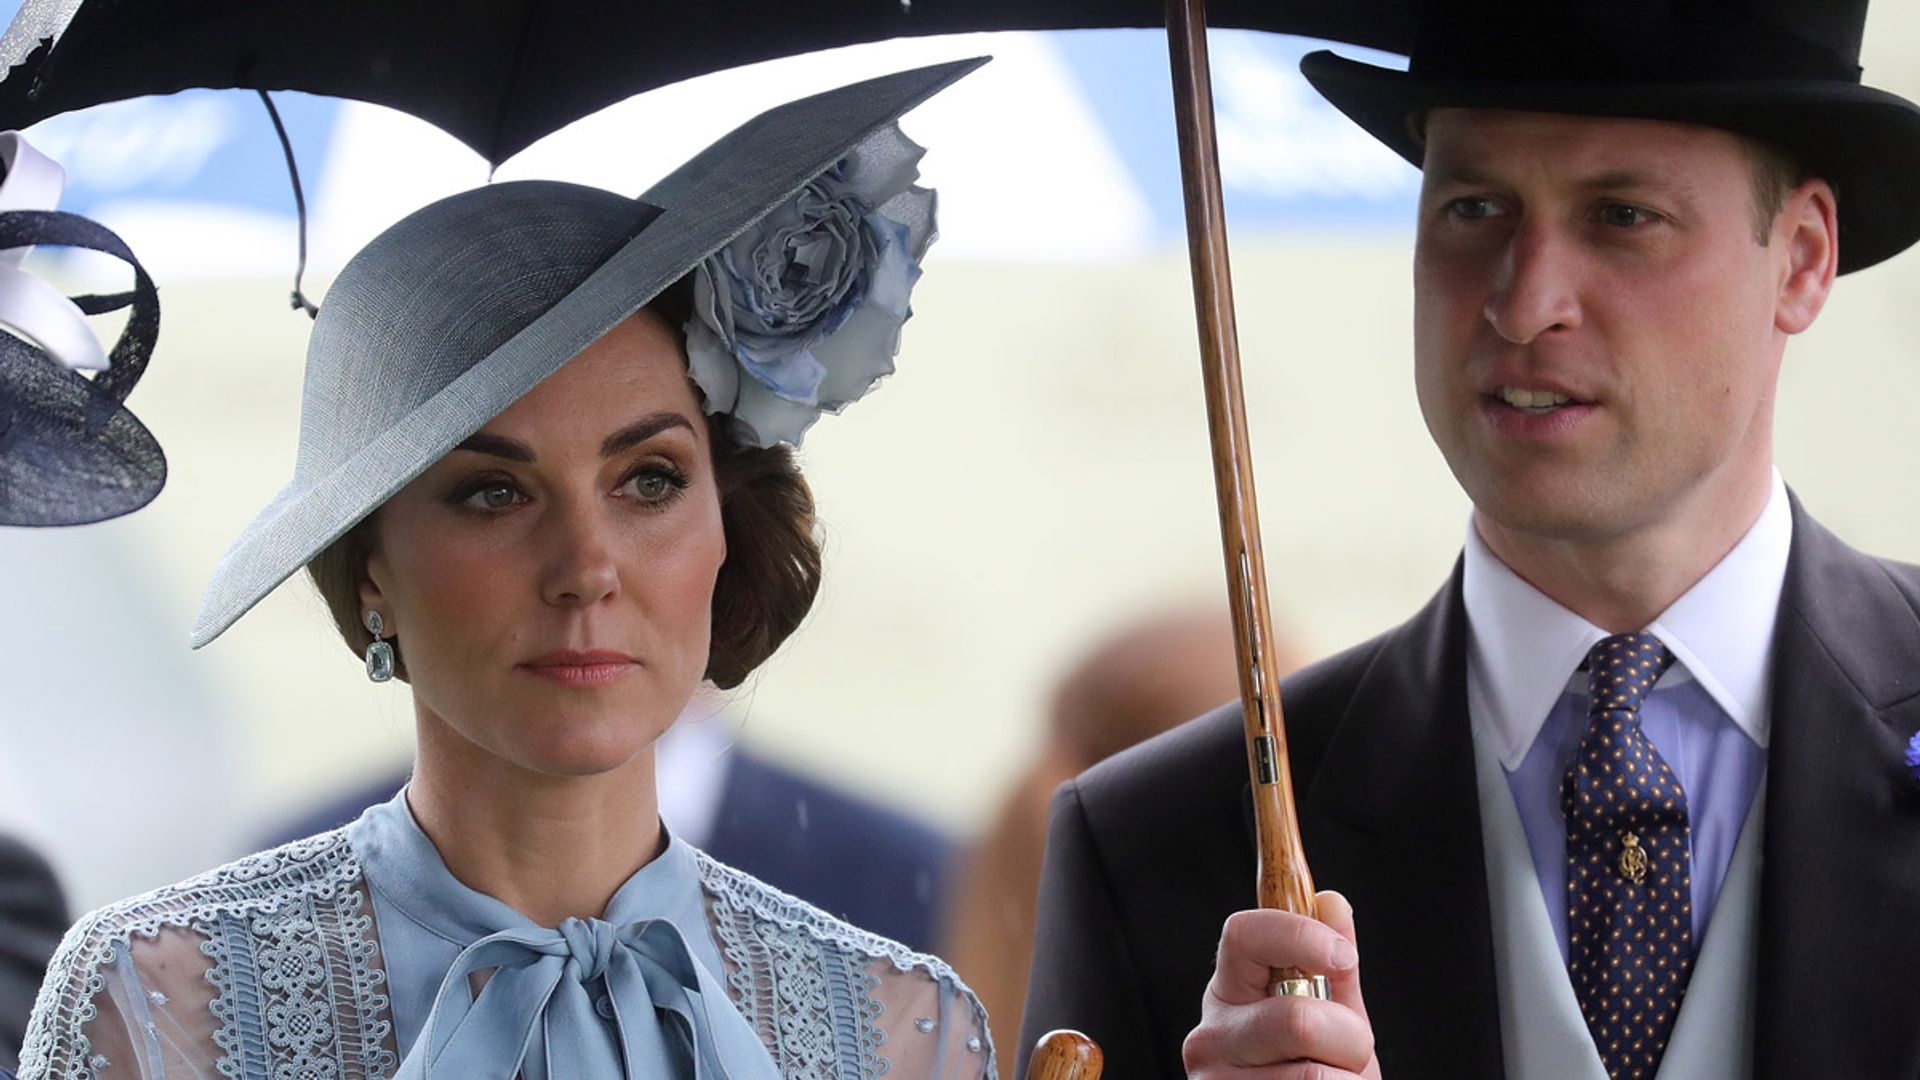 Does Kate Middleton want a divorce? Prince William’s infamous alleged affair